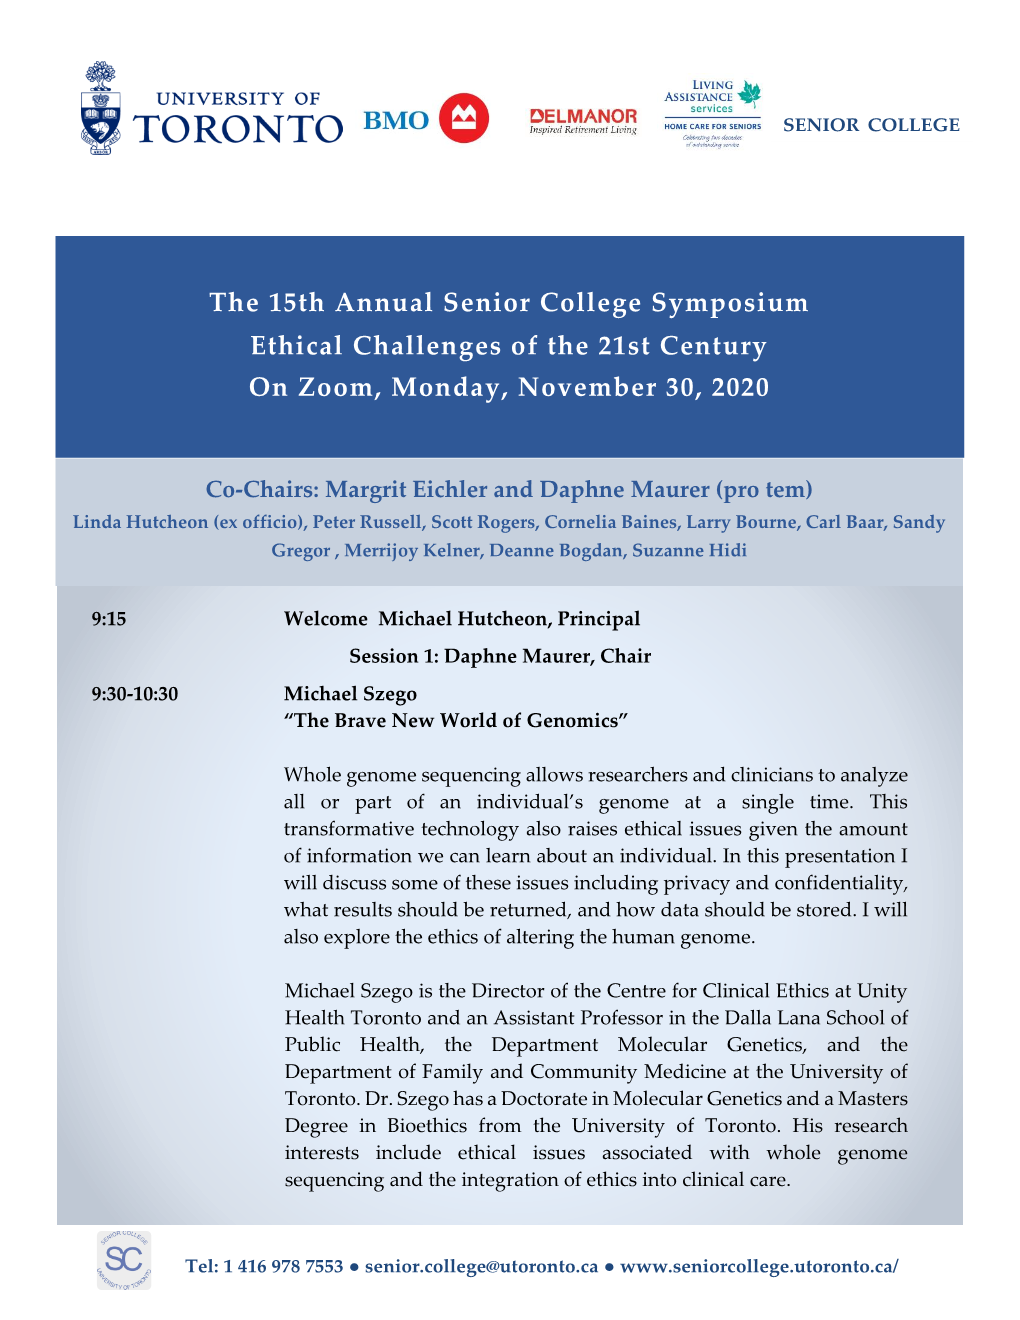 The 15Th Annual Senior College Symposium Ethical Challenges of the 21St Century on Zoom, Monday, November 30, 2020